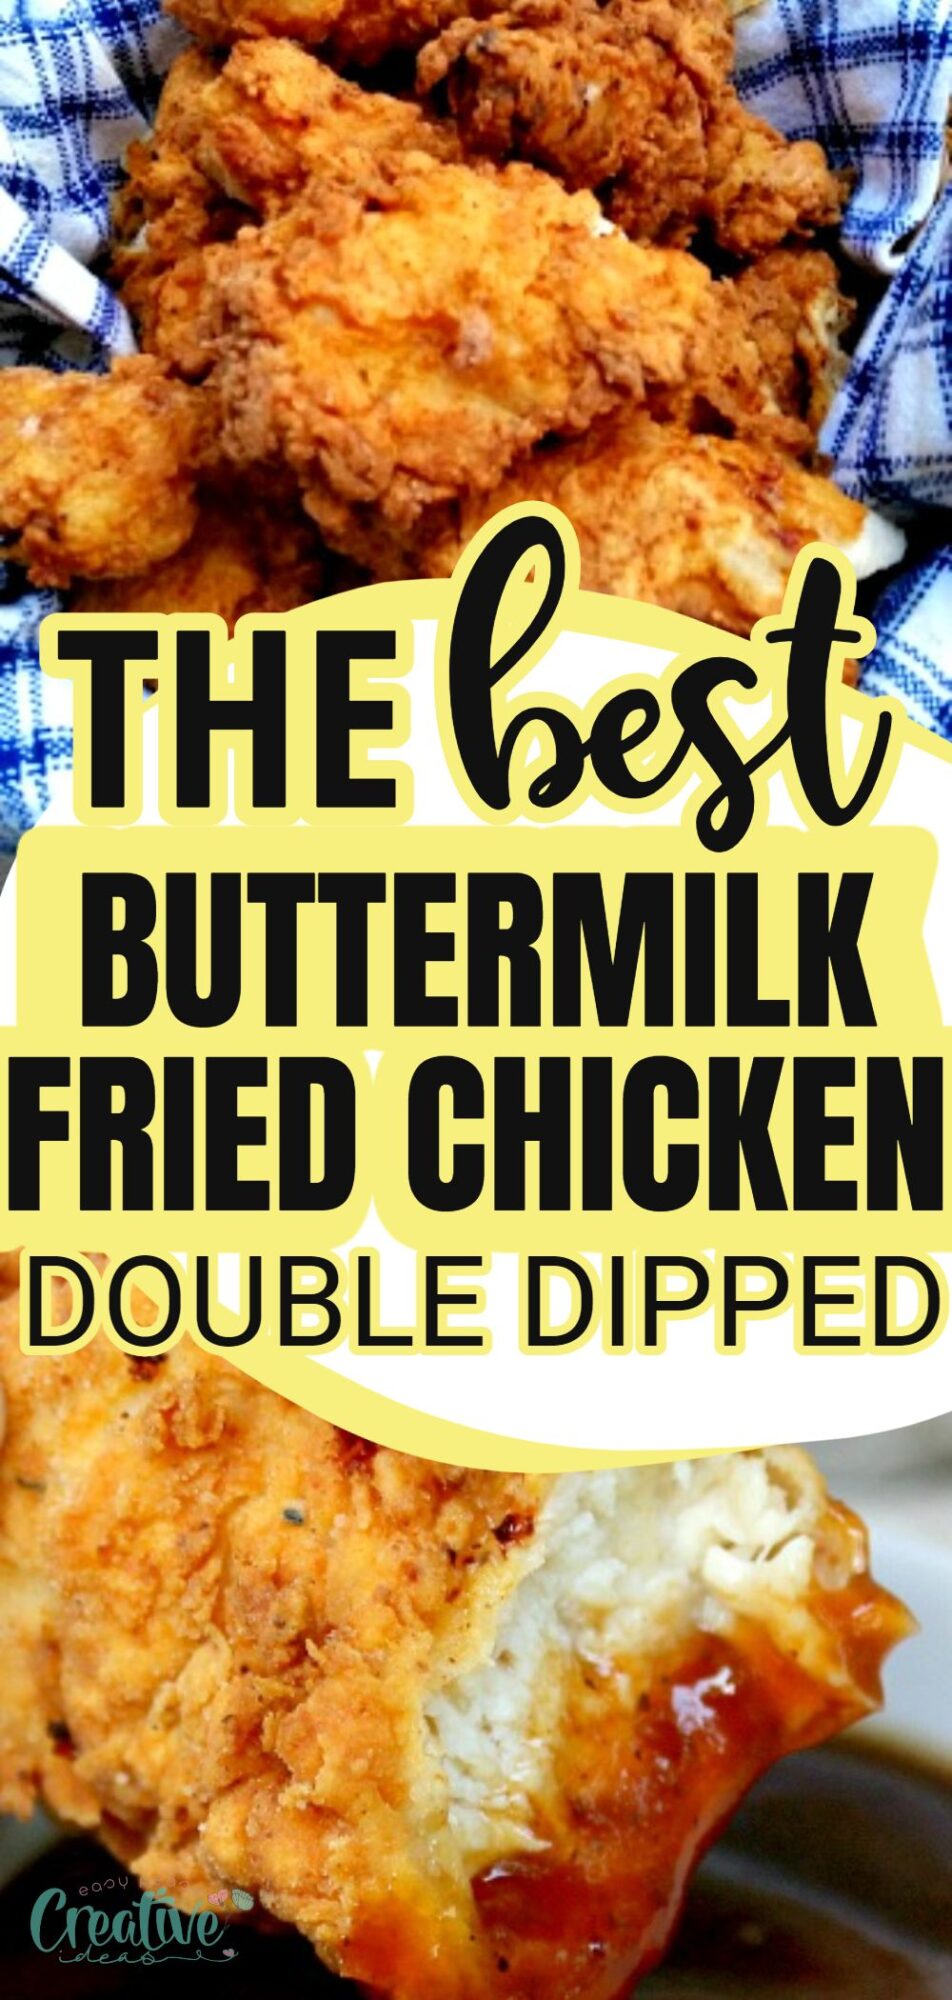 Deliciously buttermilk fried chicken, double dipped for extra flavor and crispiness. Perfect for potlucks and BBQs, everyone will love it! Try the recipe now!